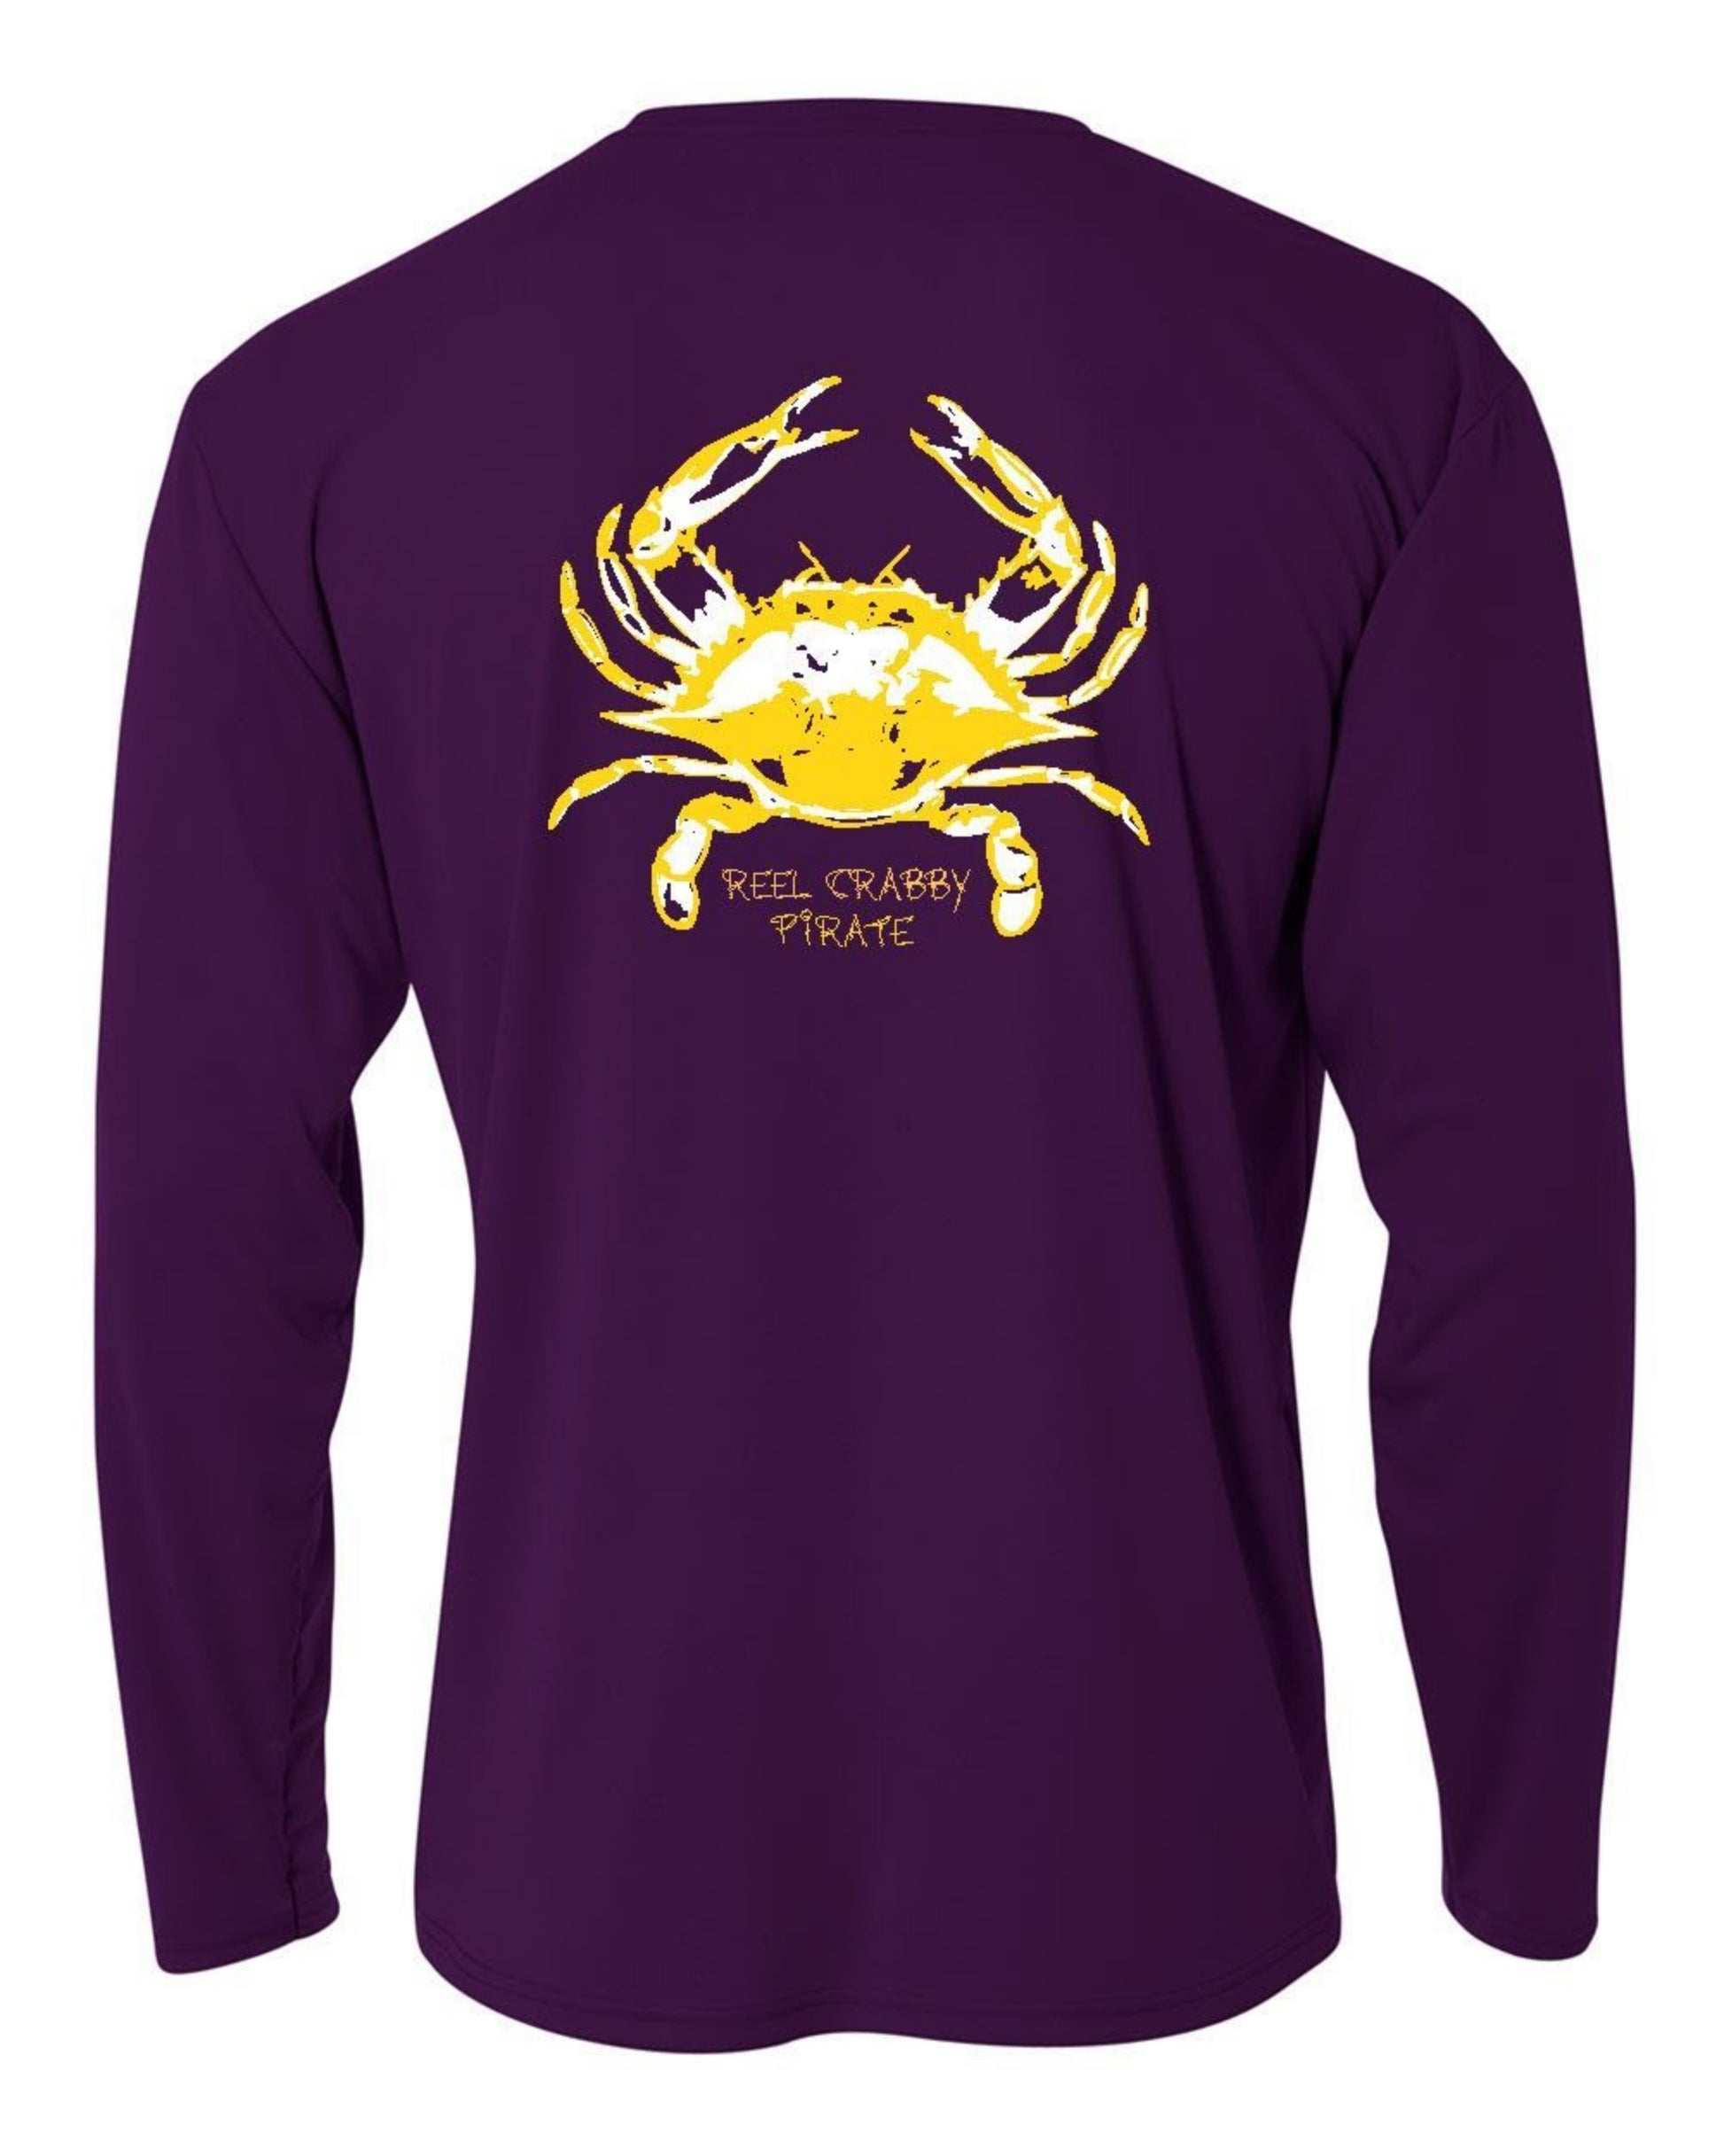 Fly Fishing Shirt, Fisherman Apparel on Soft 50/50 Tee in Purple for Fishing  Trips and Outdoor Wear, Fly Fishing Gift for Him, Fishing Stuff -   Canada